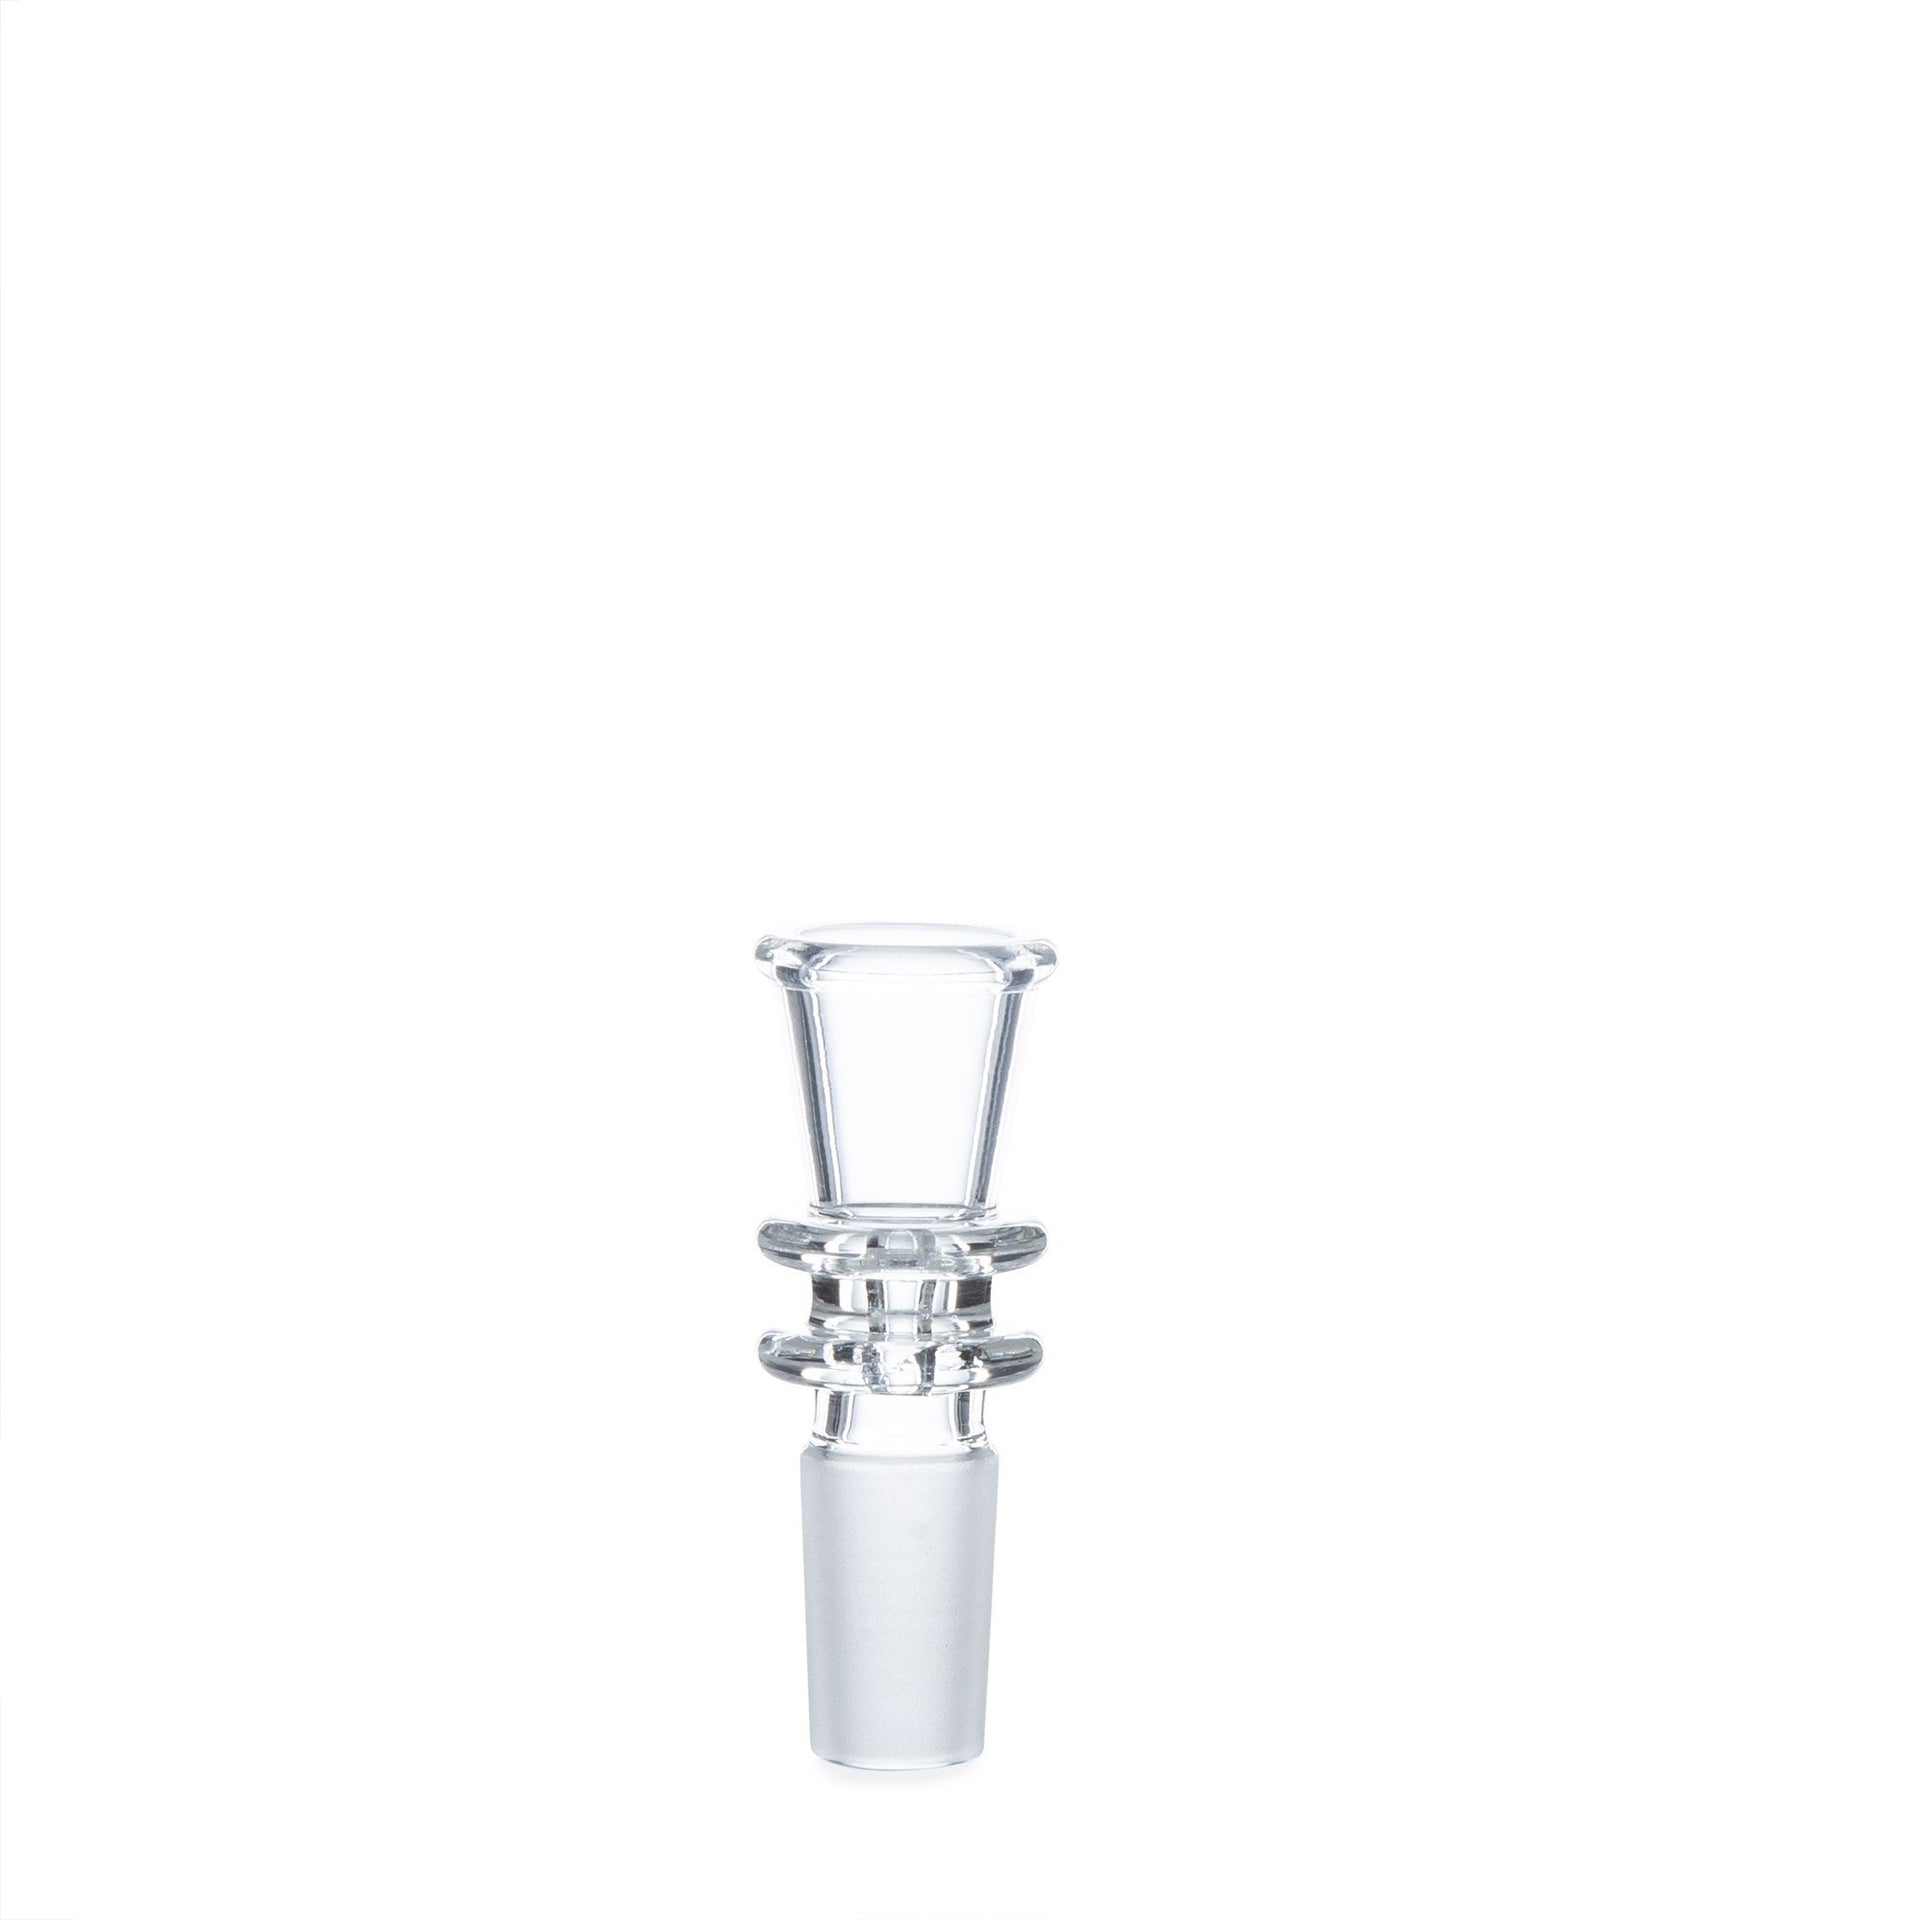 Eyce Beaker 14mm Glass Bowl - 420 Science - The most trusted online smoke shop.